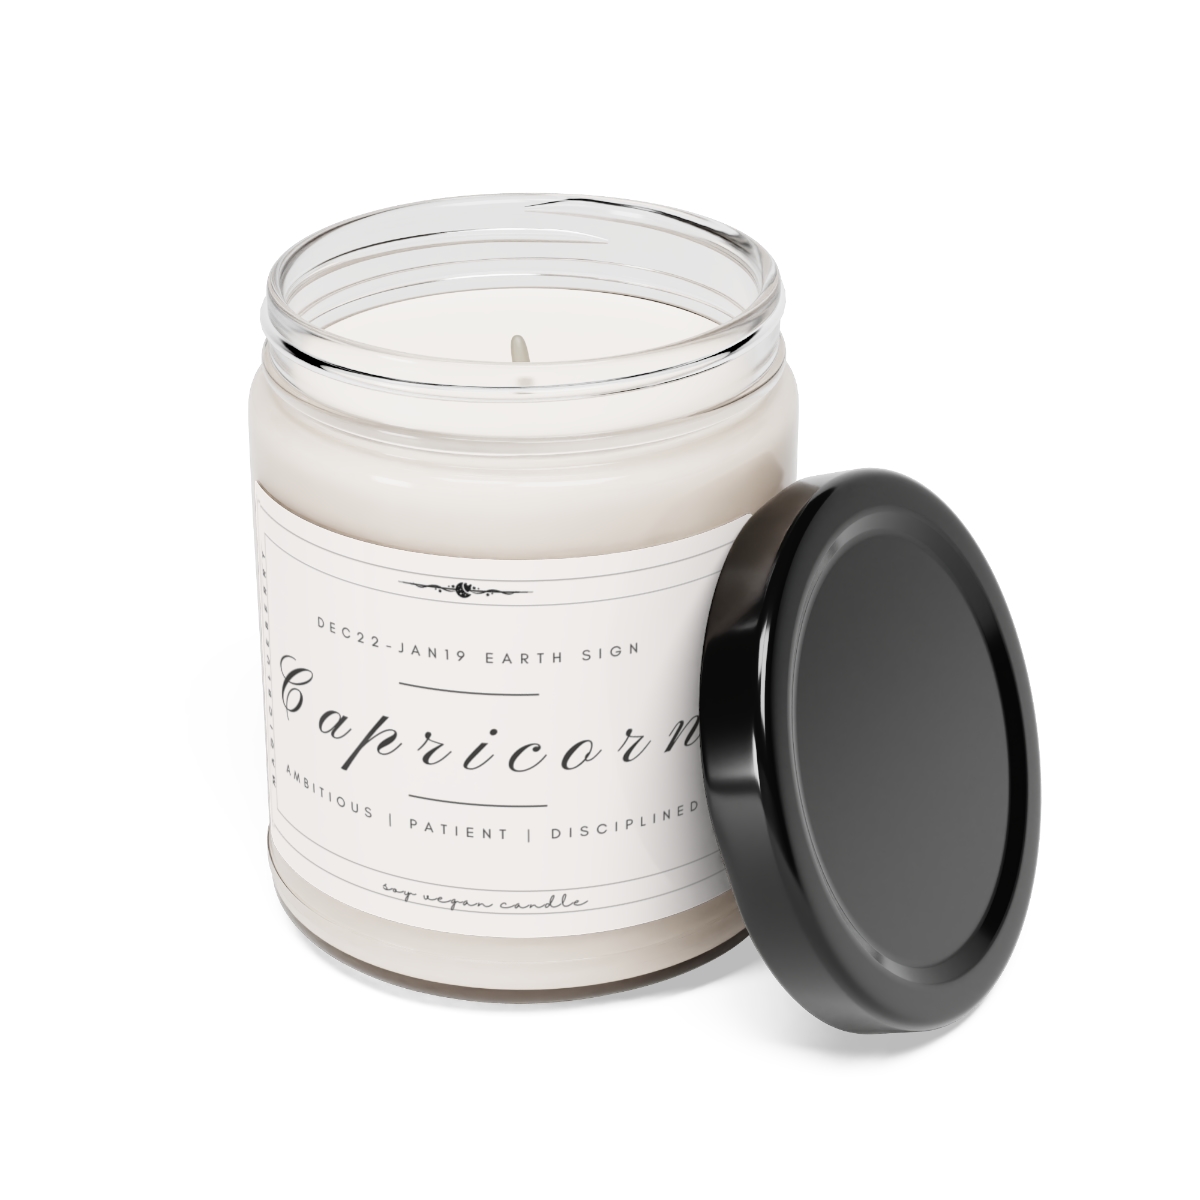 Capricorn - Scented Vegan Soy Wax Candle Clear Jar Candle, Spell Candle, Sassy Candle Vegan Candle Cotton Wick Candle Home Deco product thumbnail image